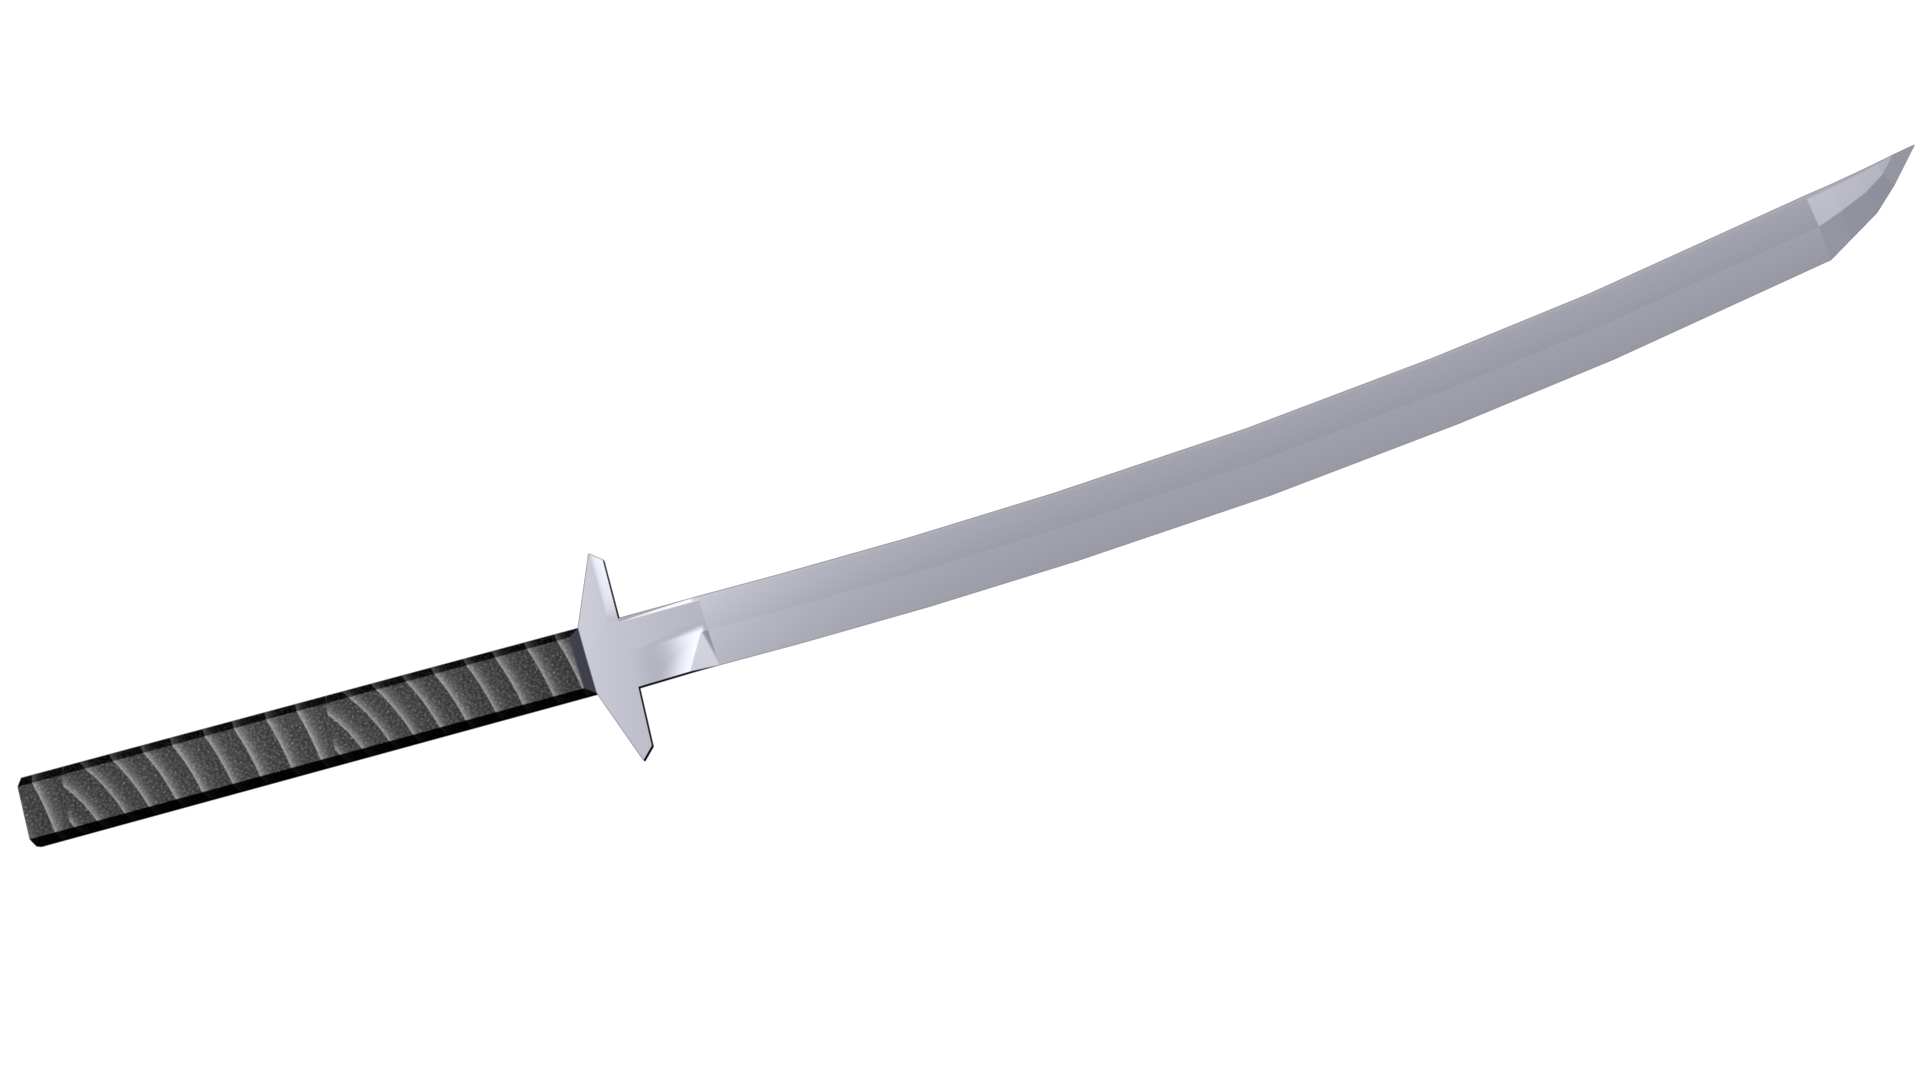 PNG File Name: Knight Sword P